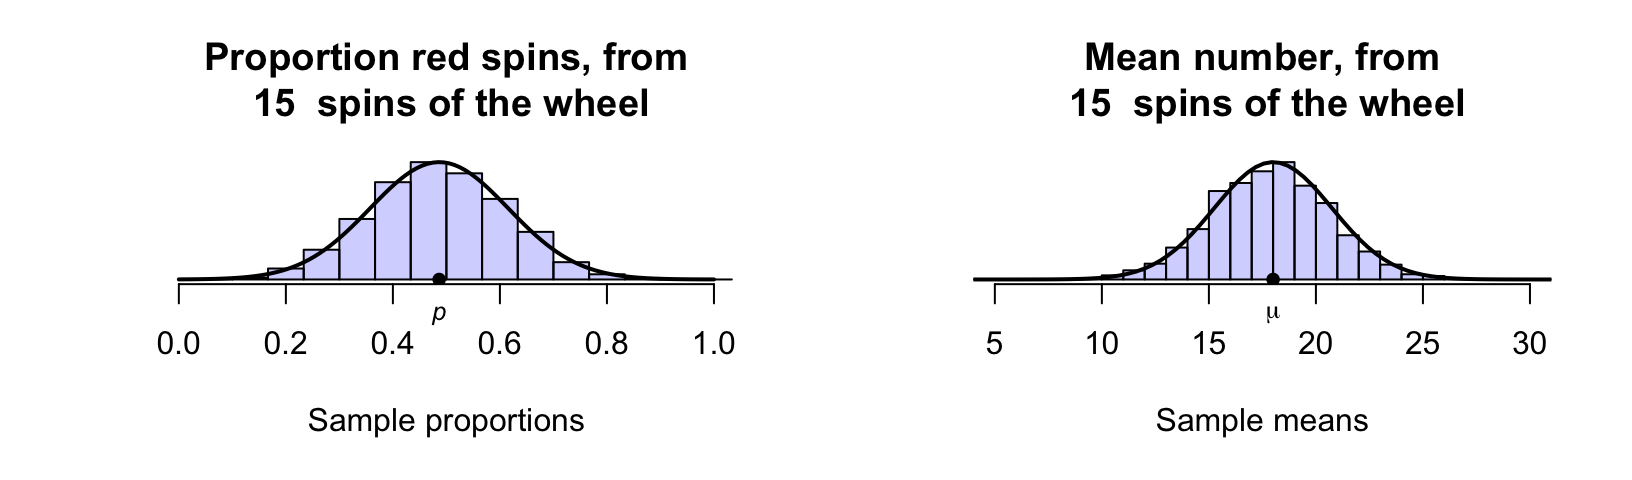 Sampling distributions for the proportion of red spins (left), and the mean of the numbers after $15$ roulette wheel spins (right) are approximate normal distributions. The solid lines are theoretical normal distributions.